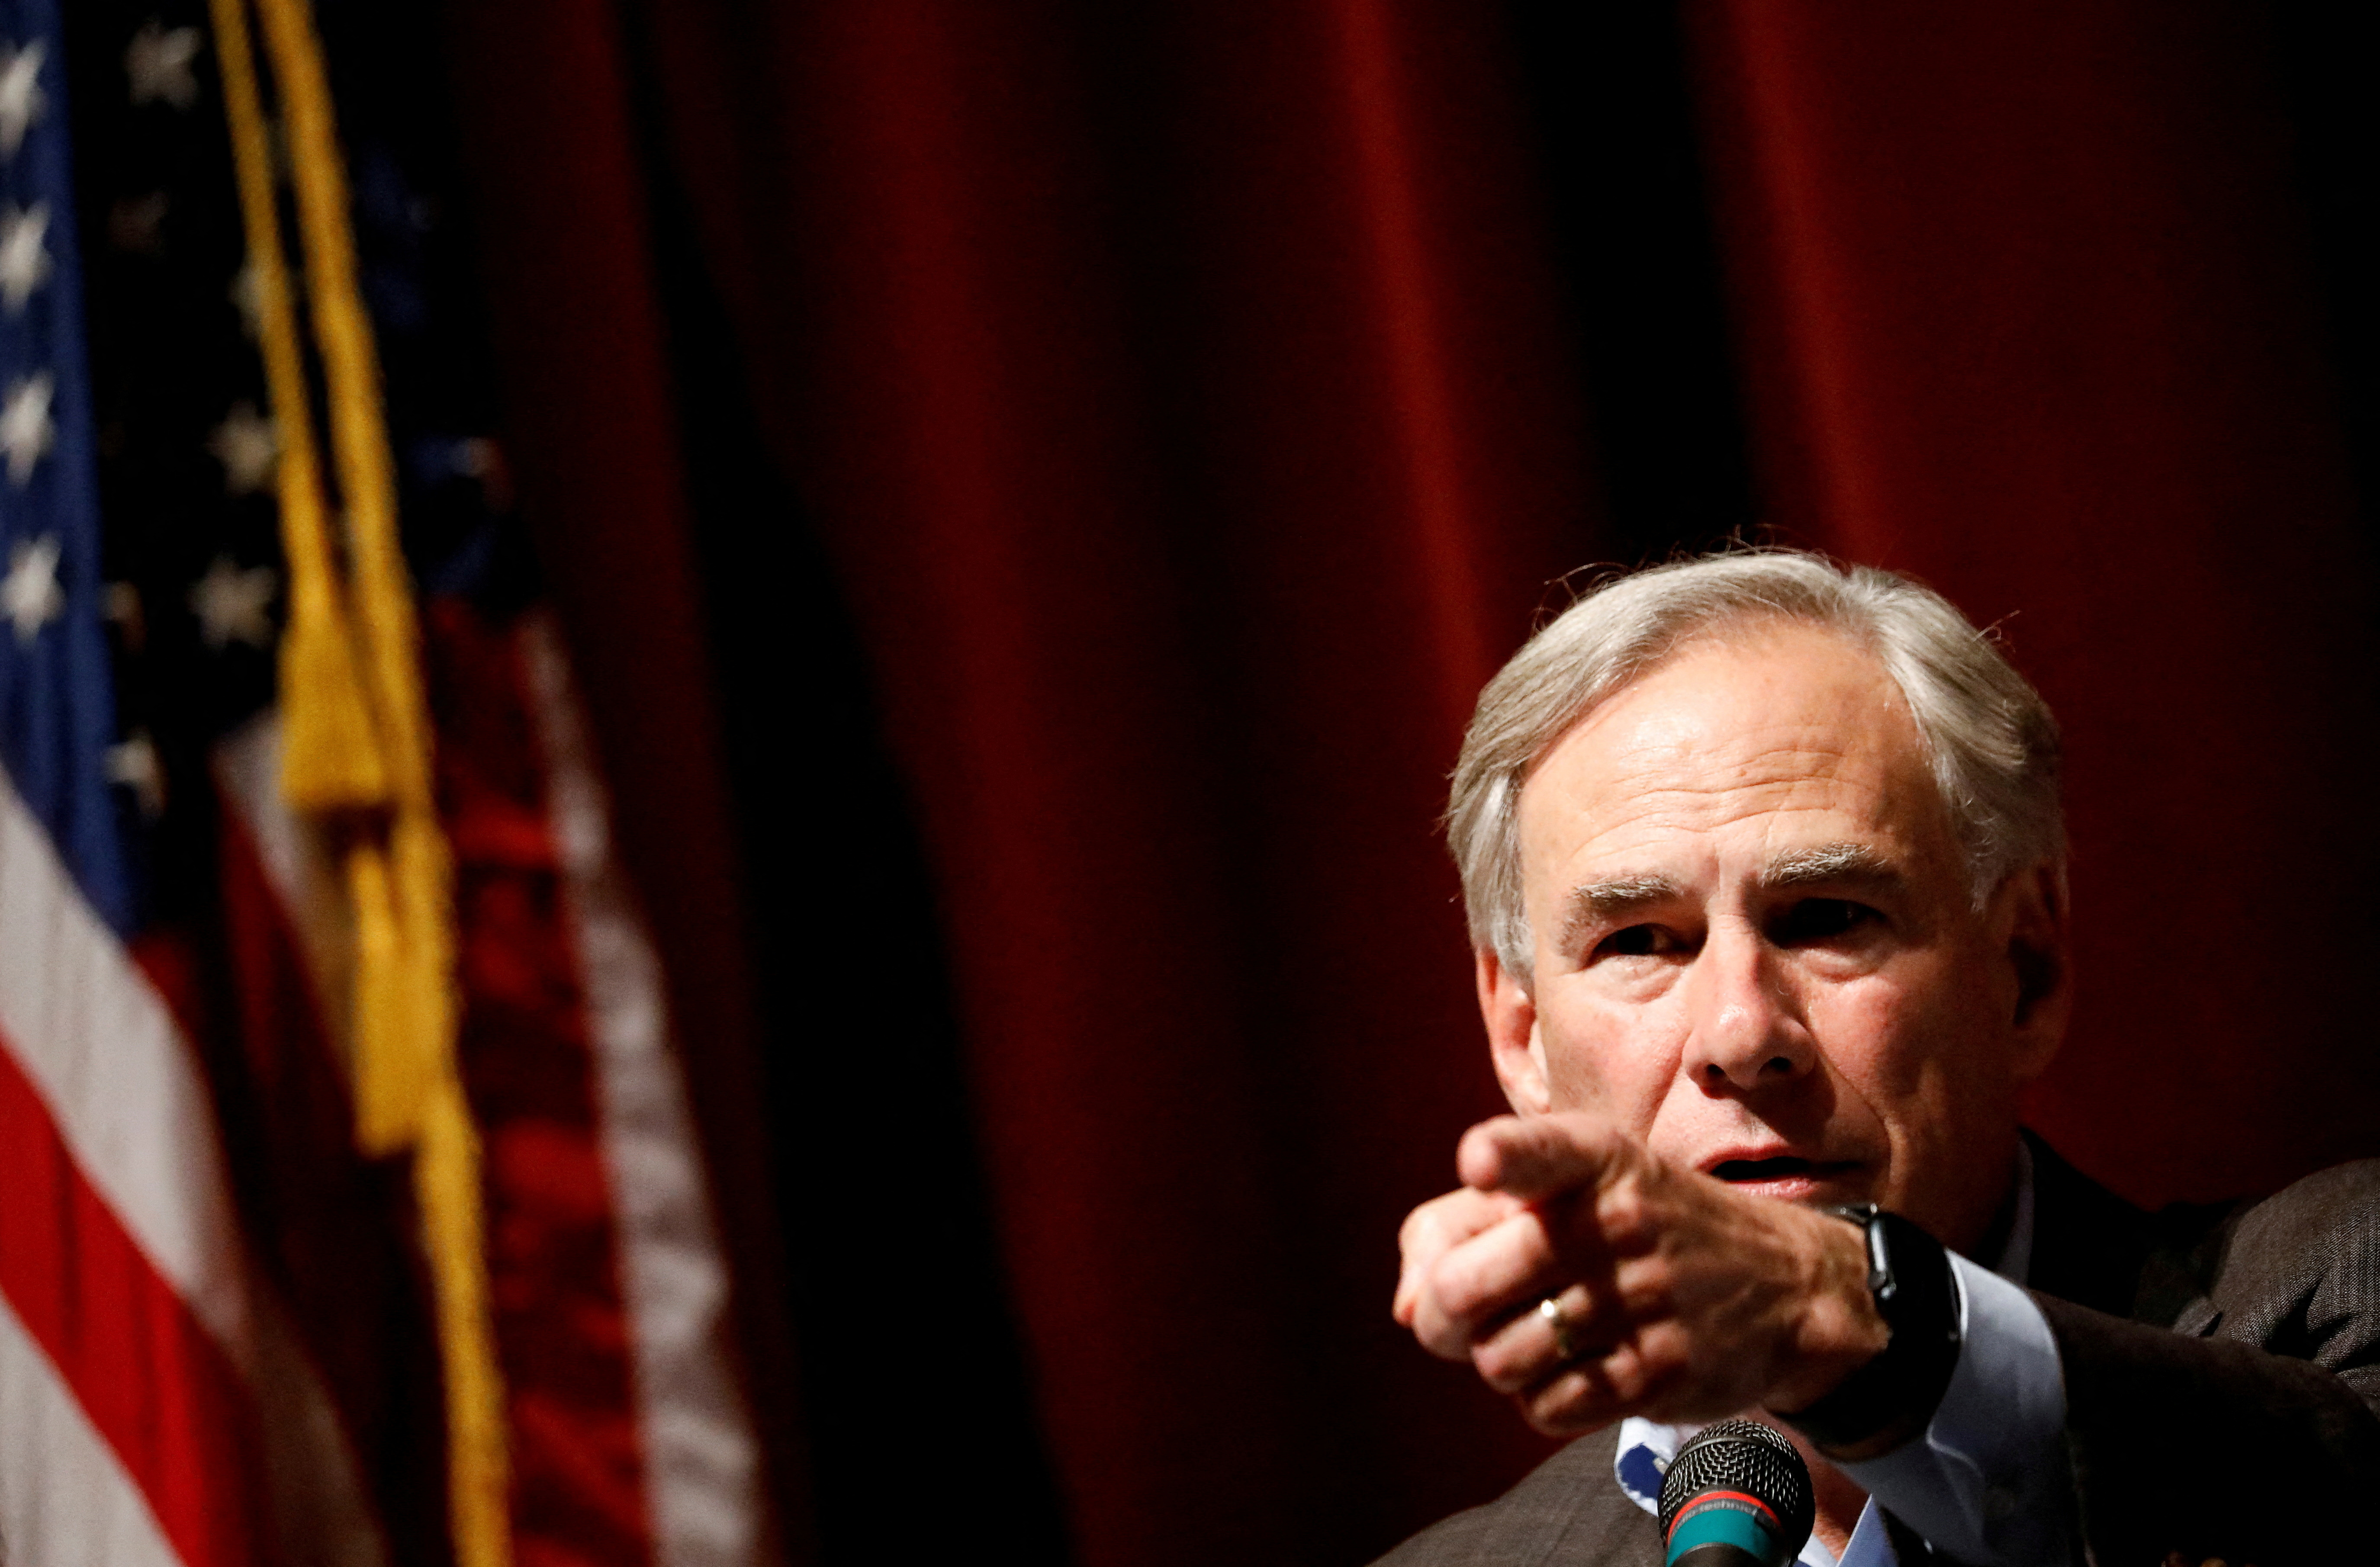 Texas Governor Greg Abbott holds a news conference